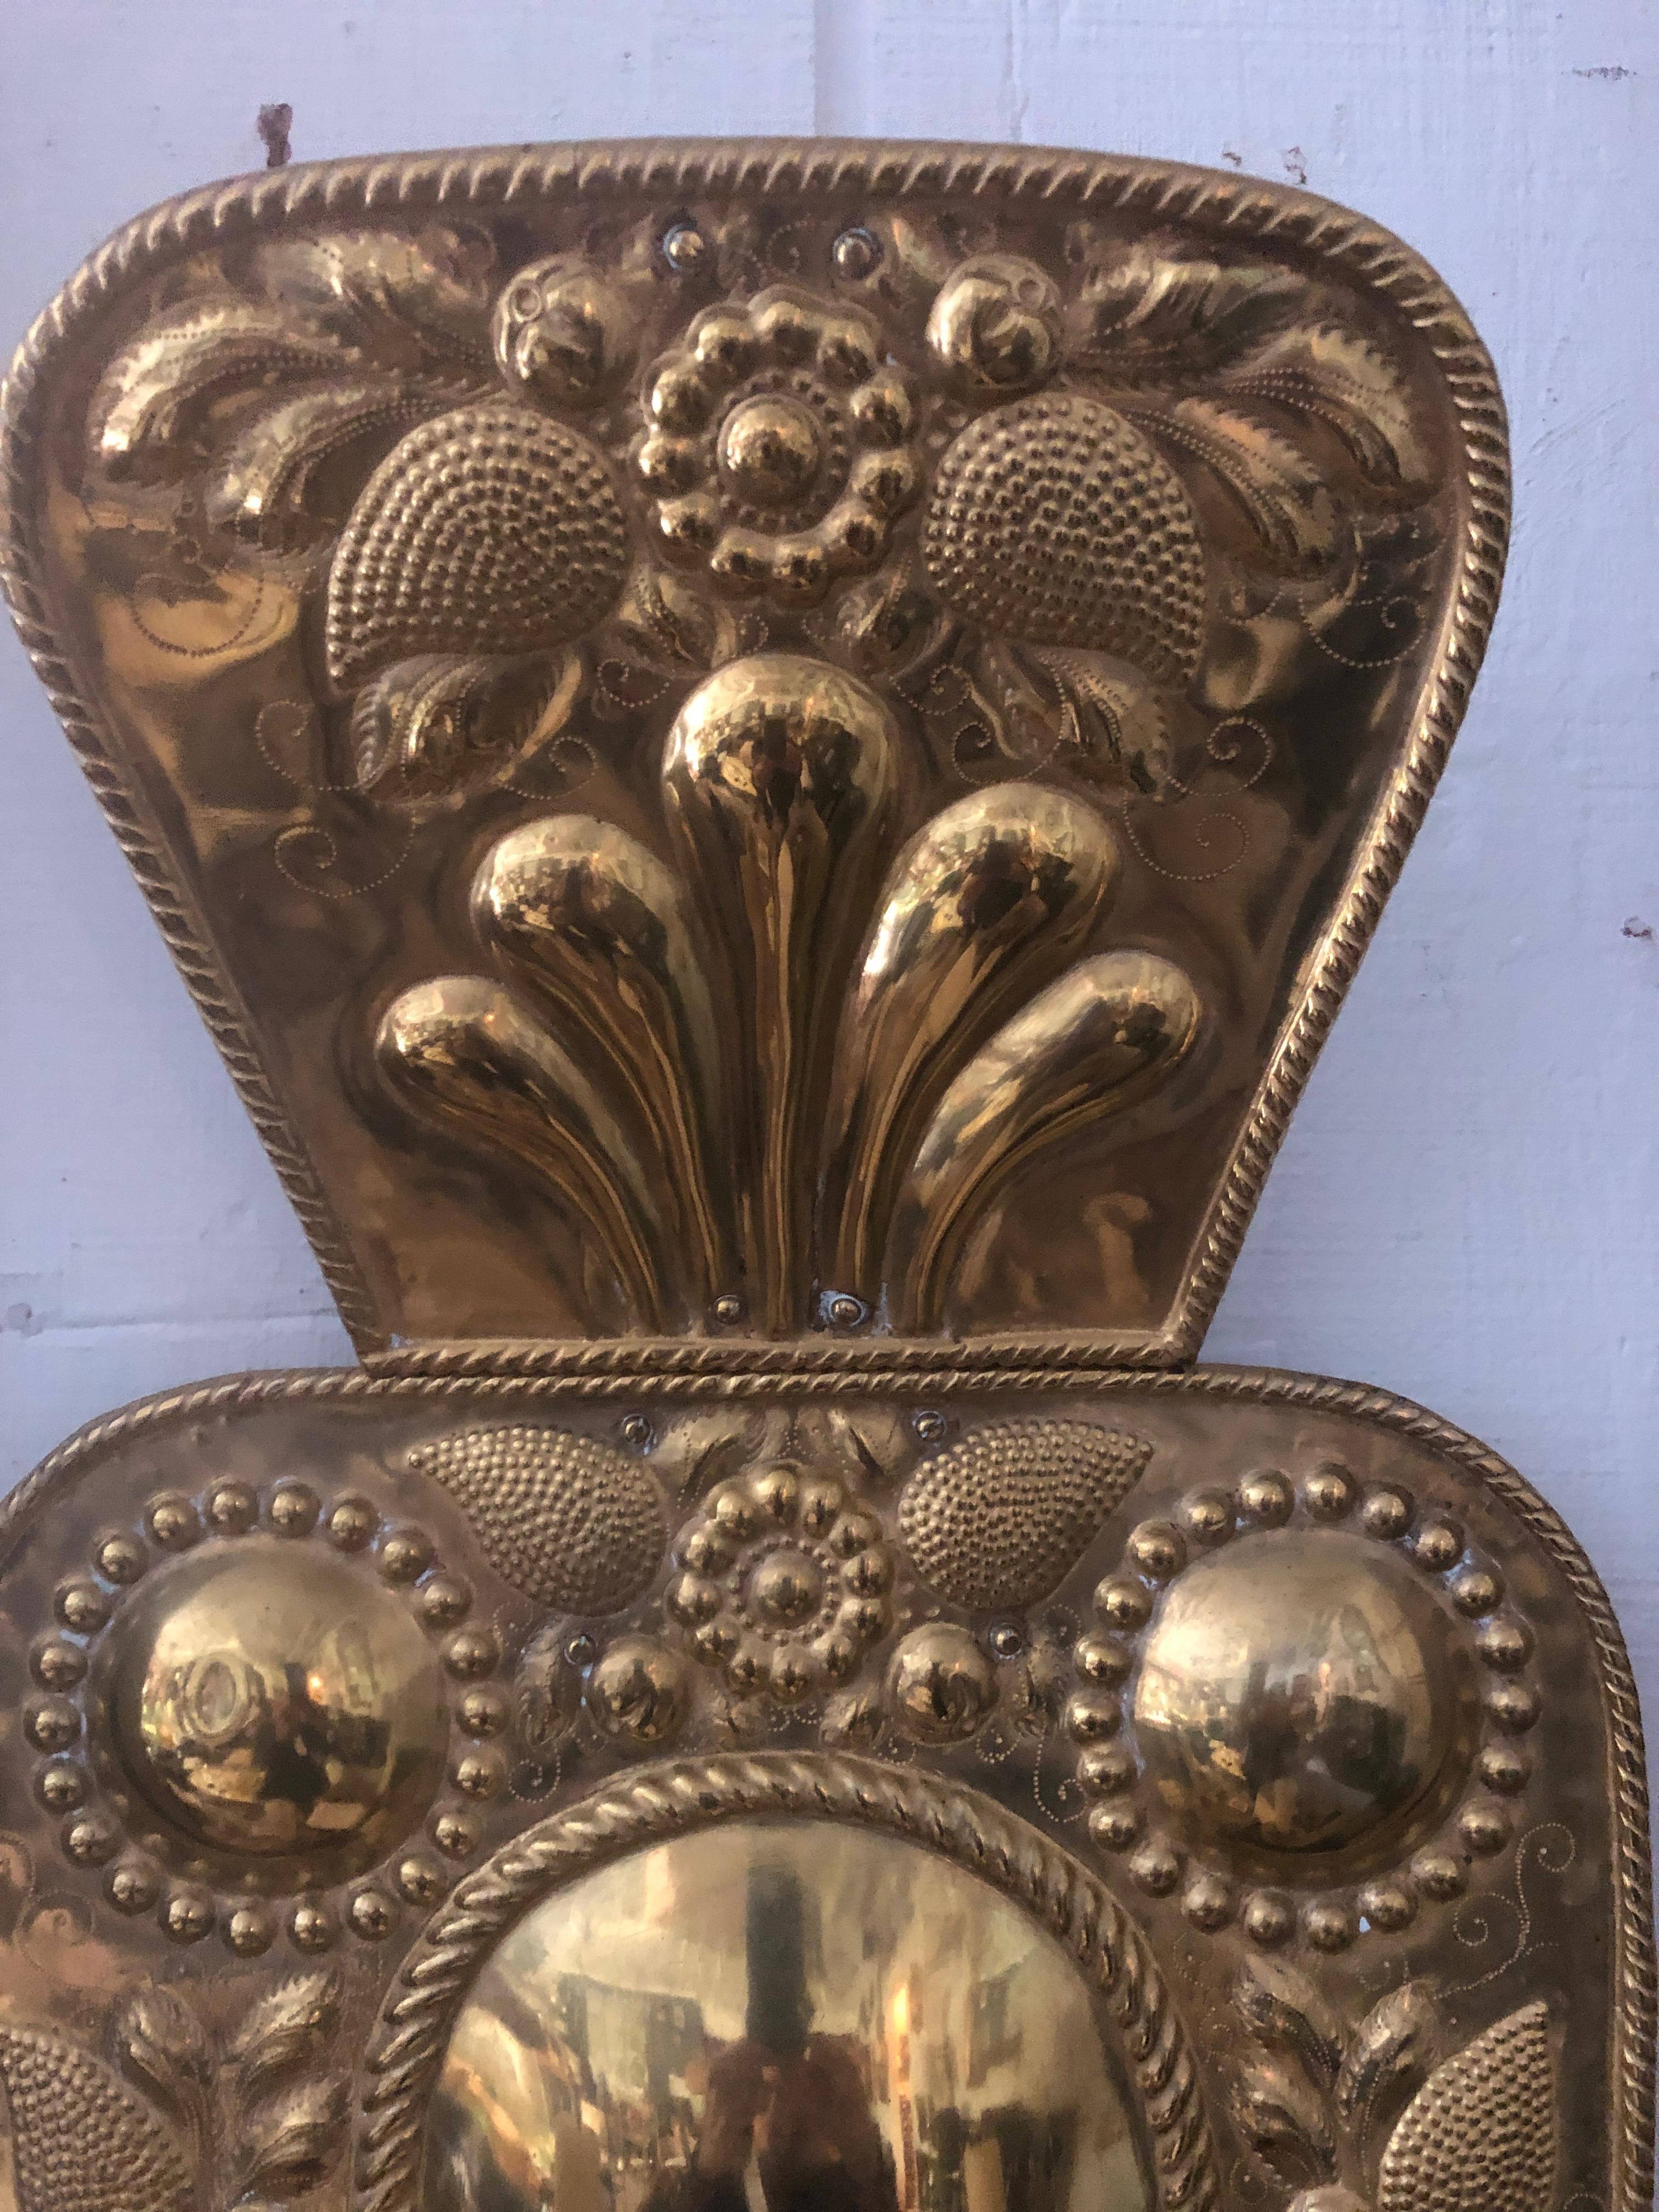 Beautiful antique Dutch brass candle sconce having two arms and wonderful raised decoration.